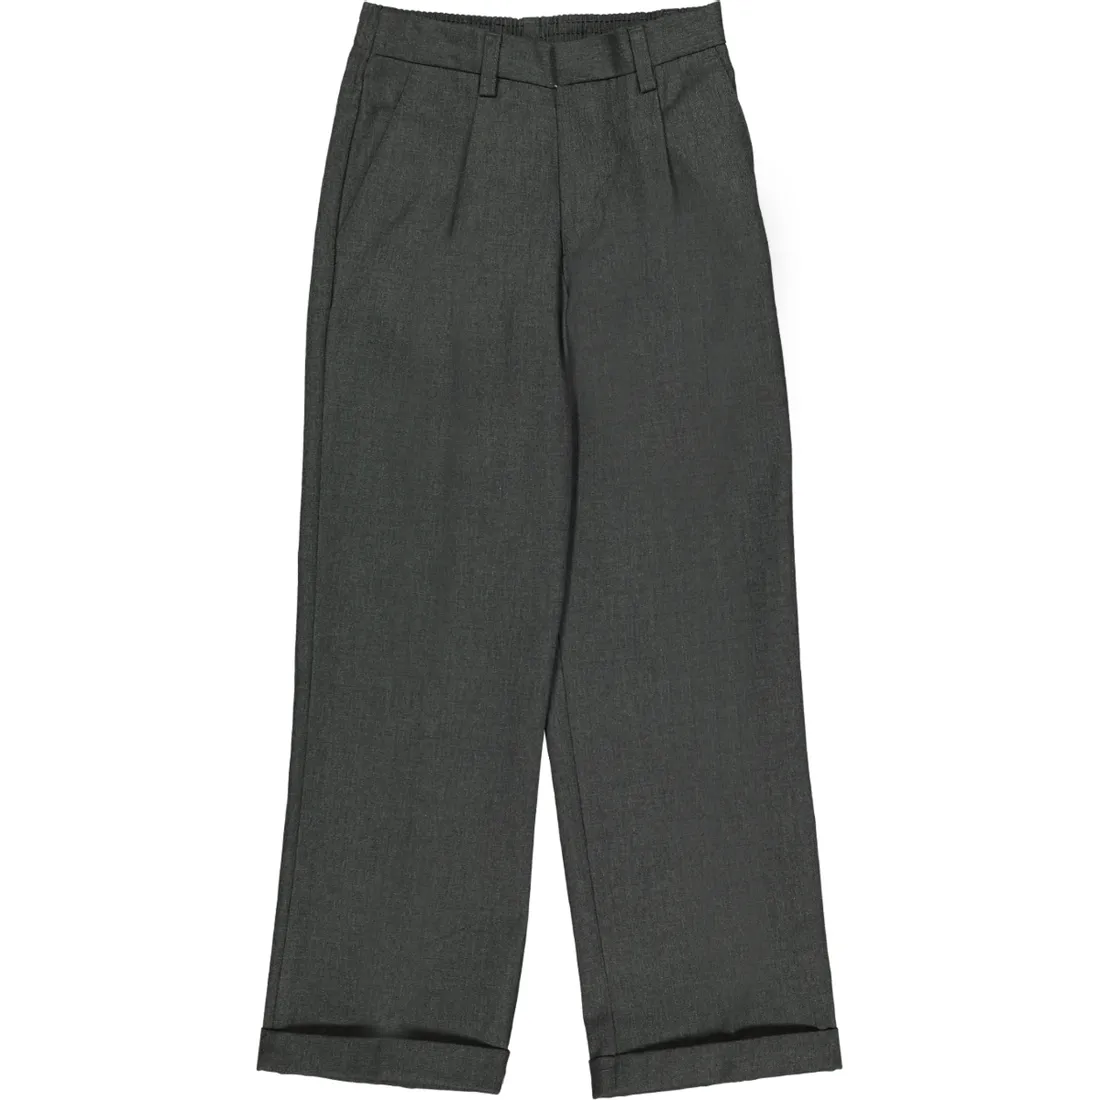 Student Prince Trousers | School | PEP